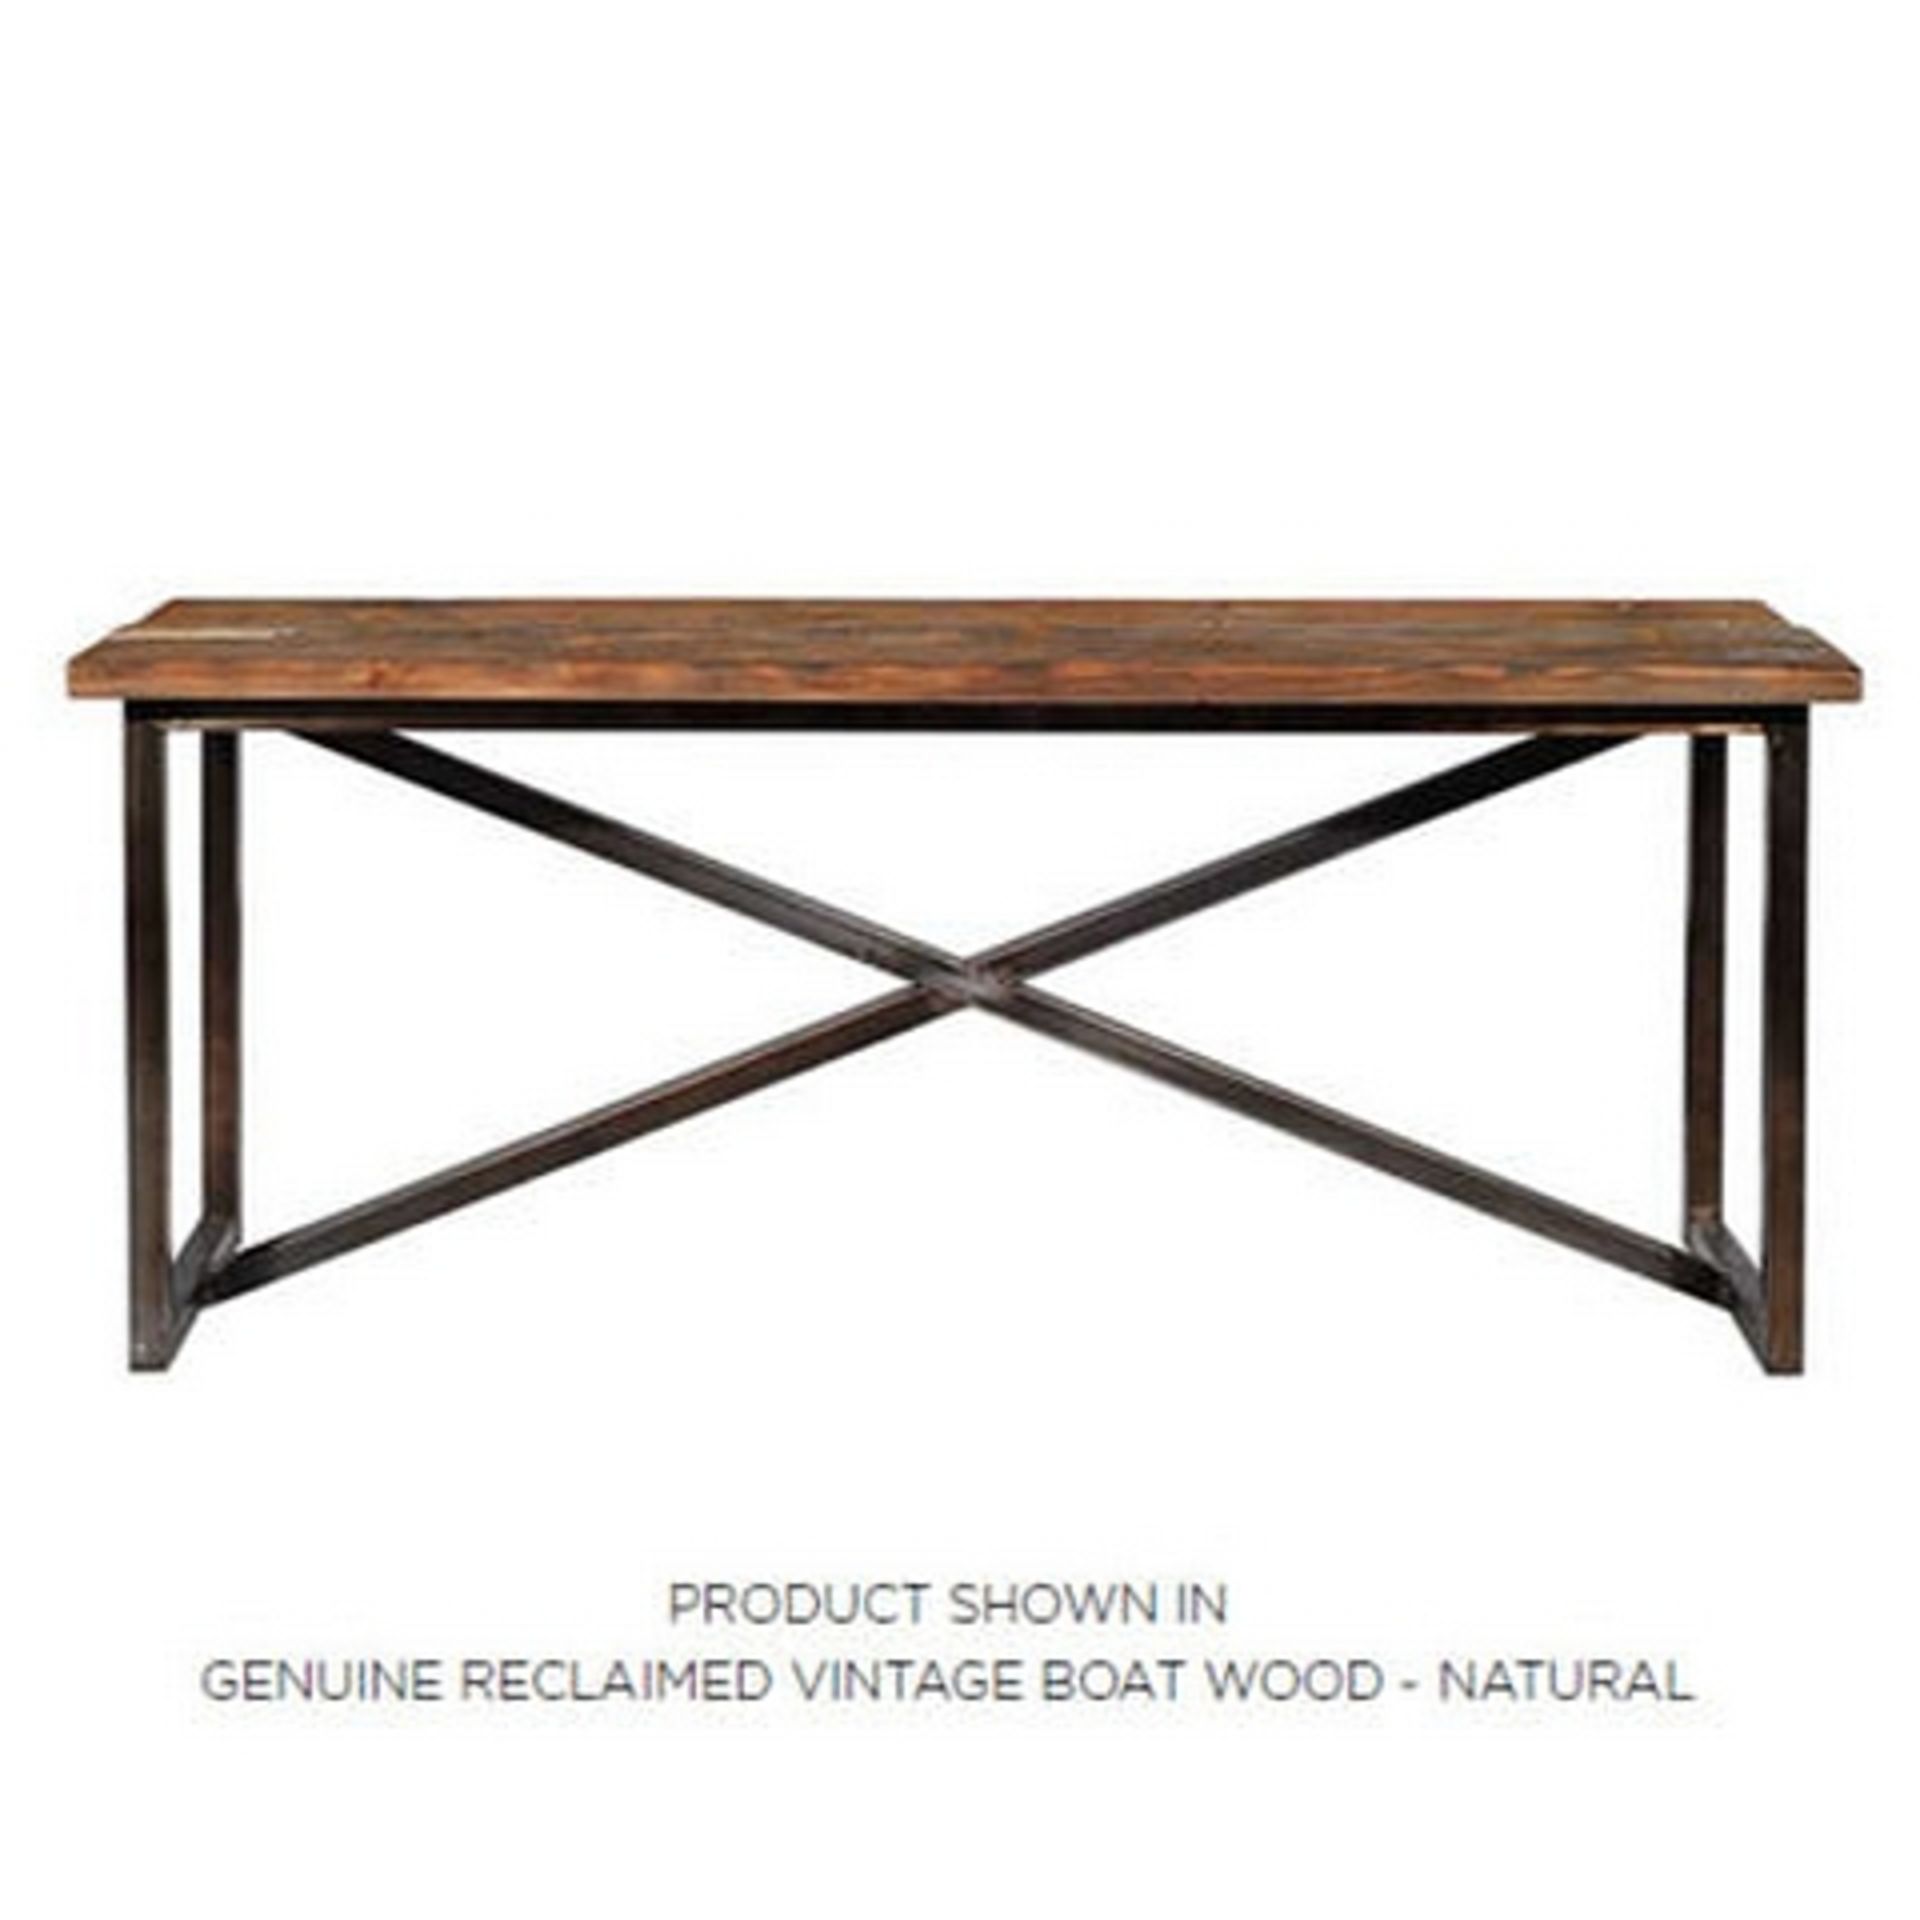 Axel Console Table Natural Genuine Reclaimed Vintage Boat Wood Natural 183 X 60 X 76cm The Axel